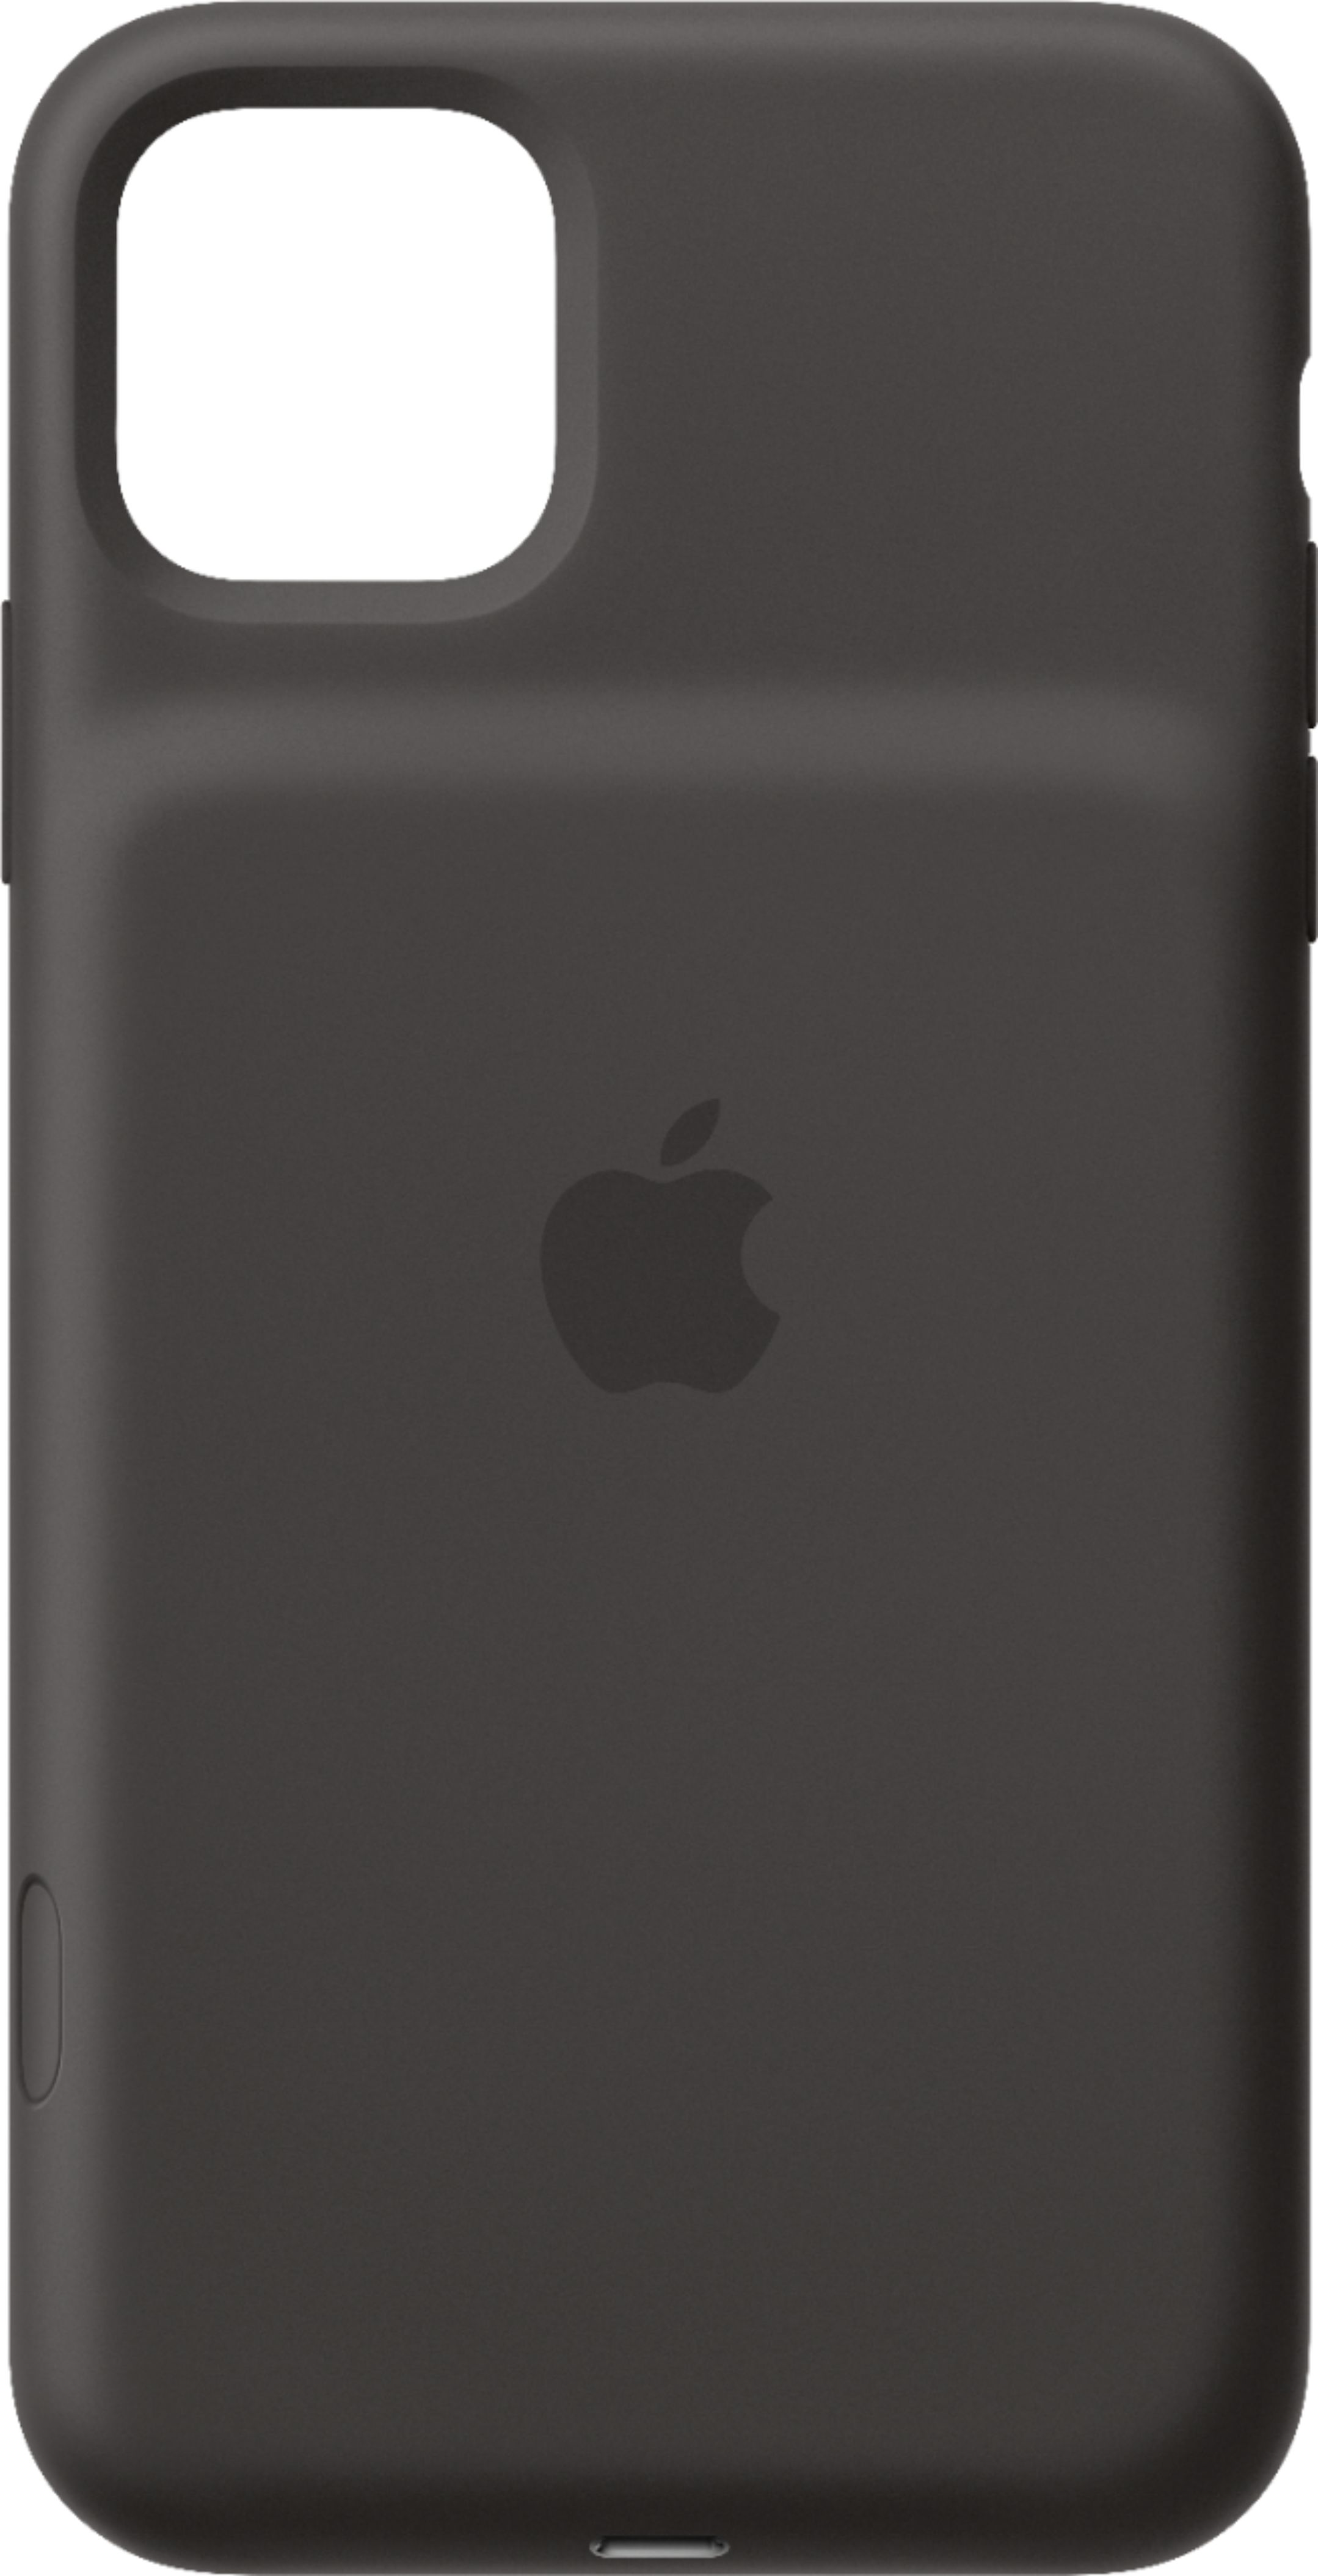 Apple - iPhone 11 Pro Max Smart Battery Case - Black $77.99 at Best Buy